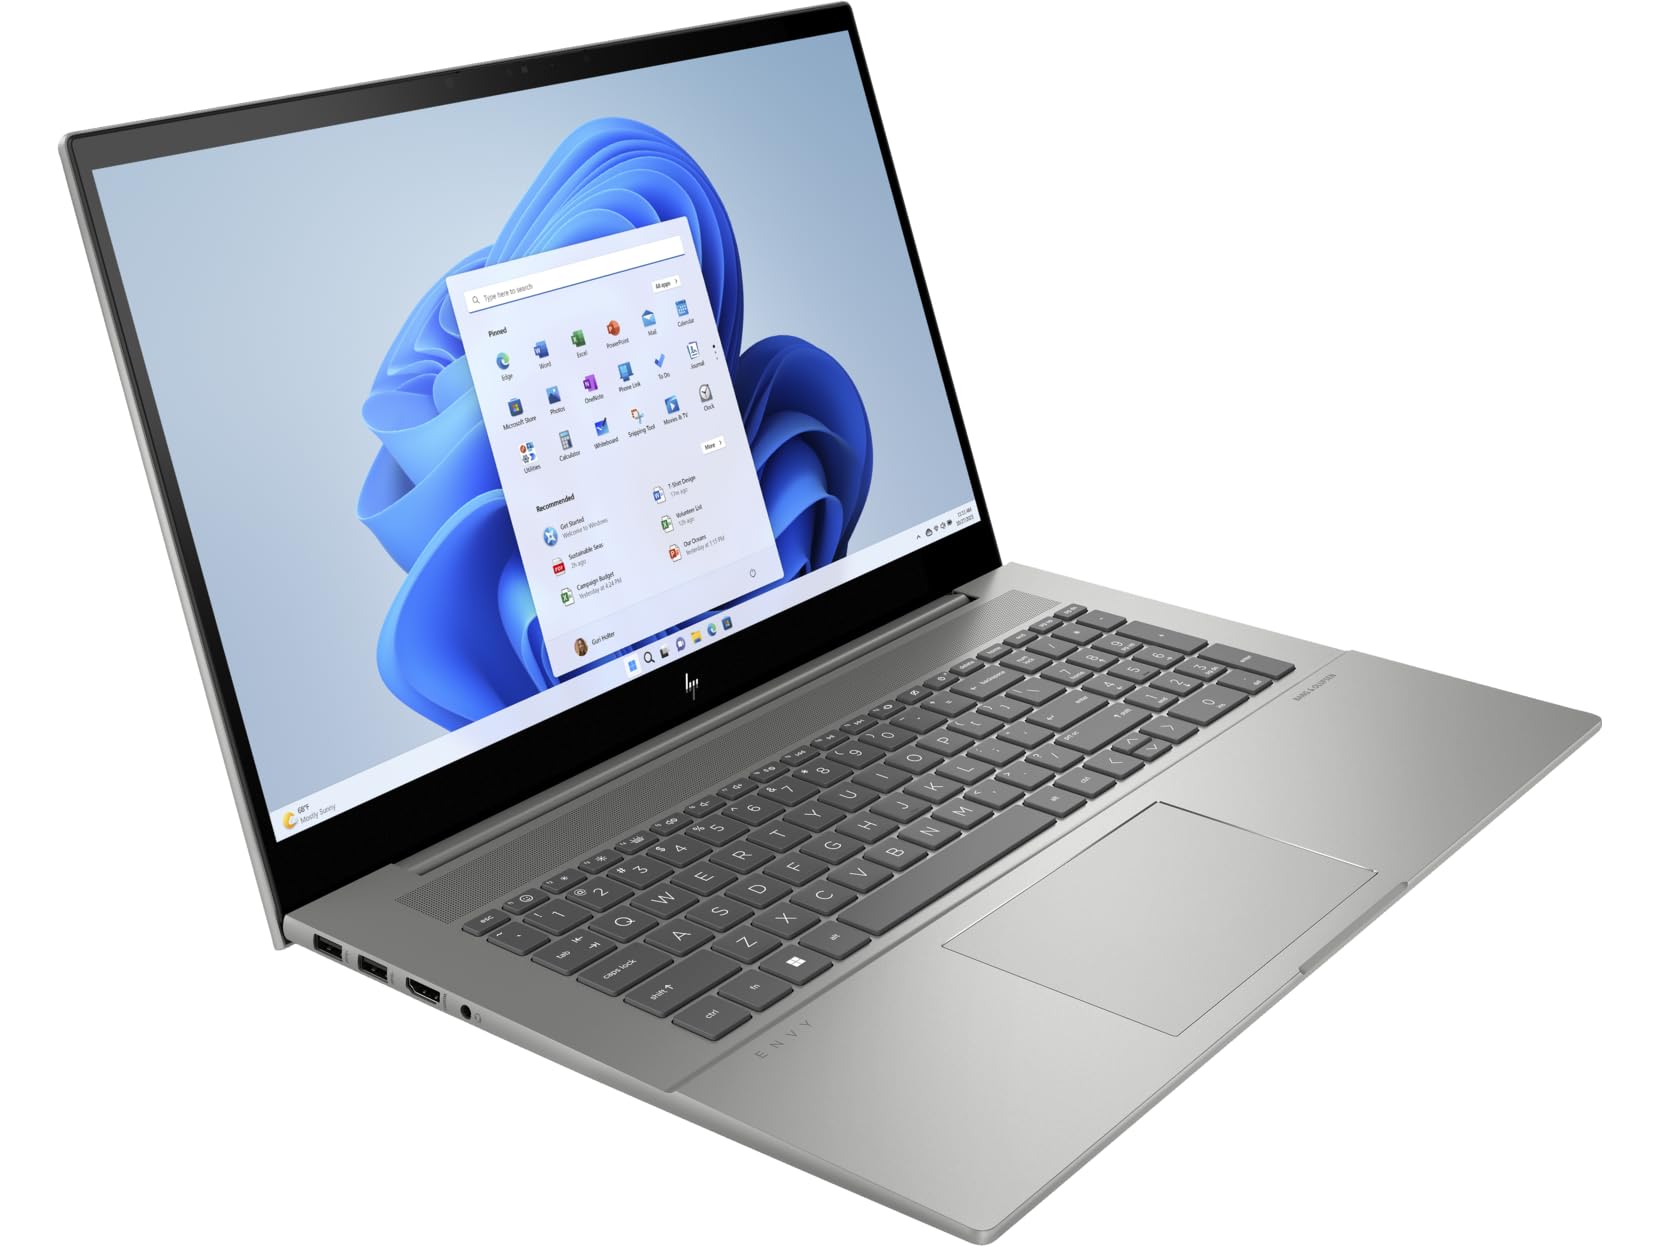 ENVY 17-j000 Select Edition Notebook PC series